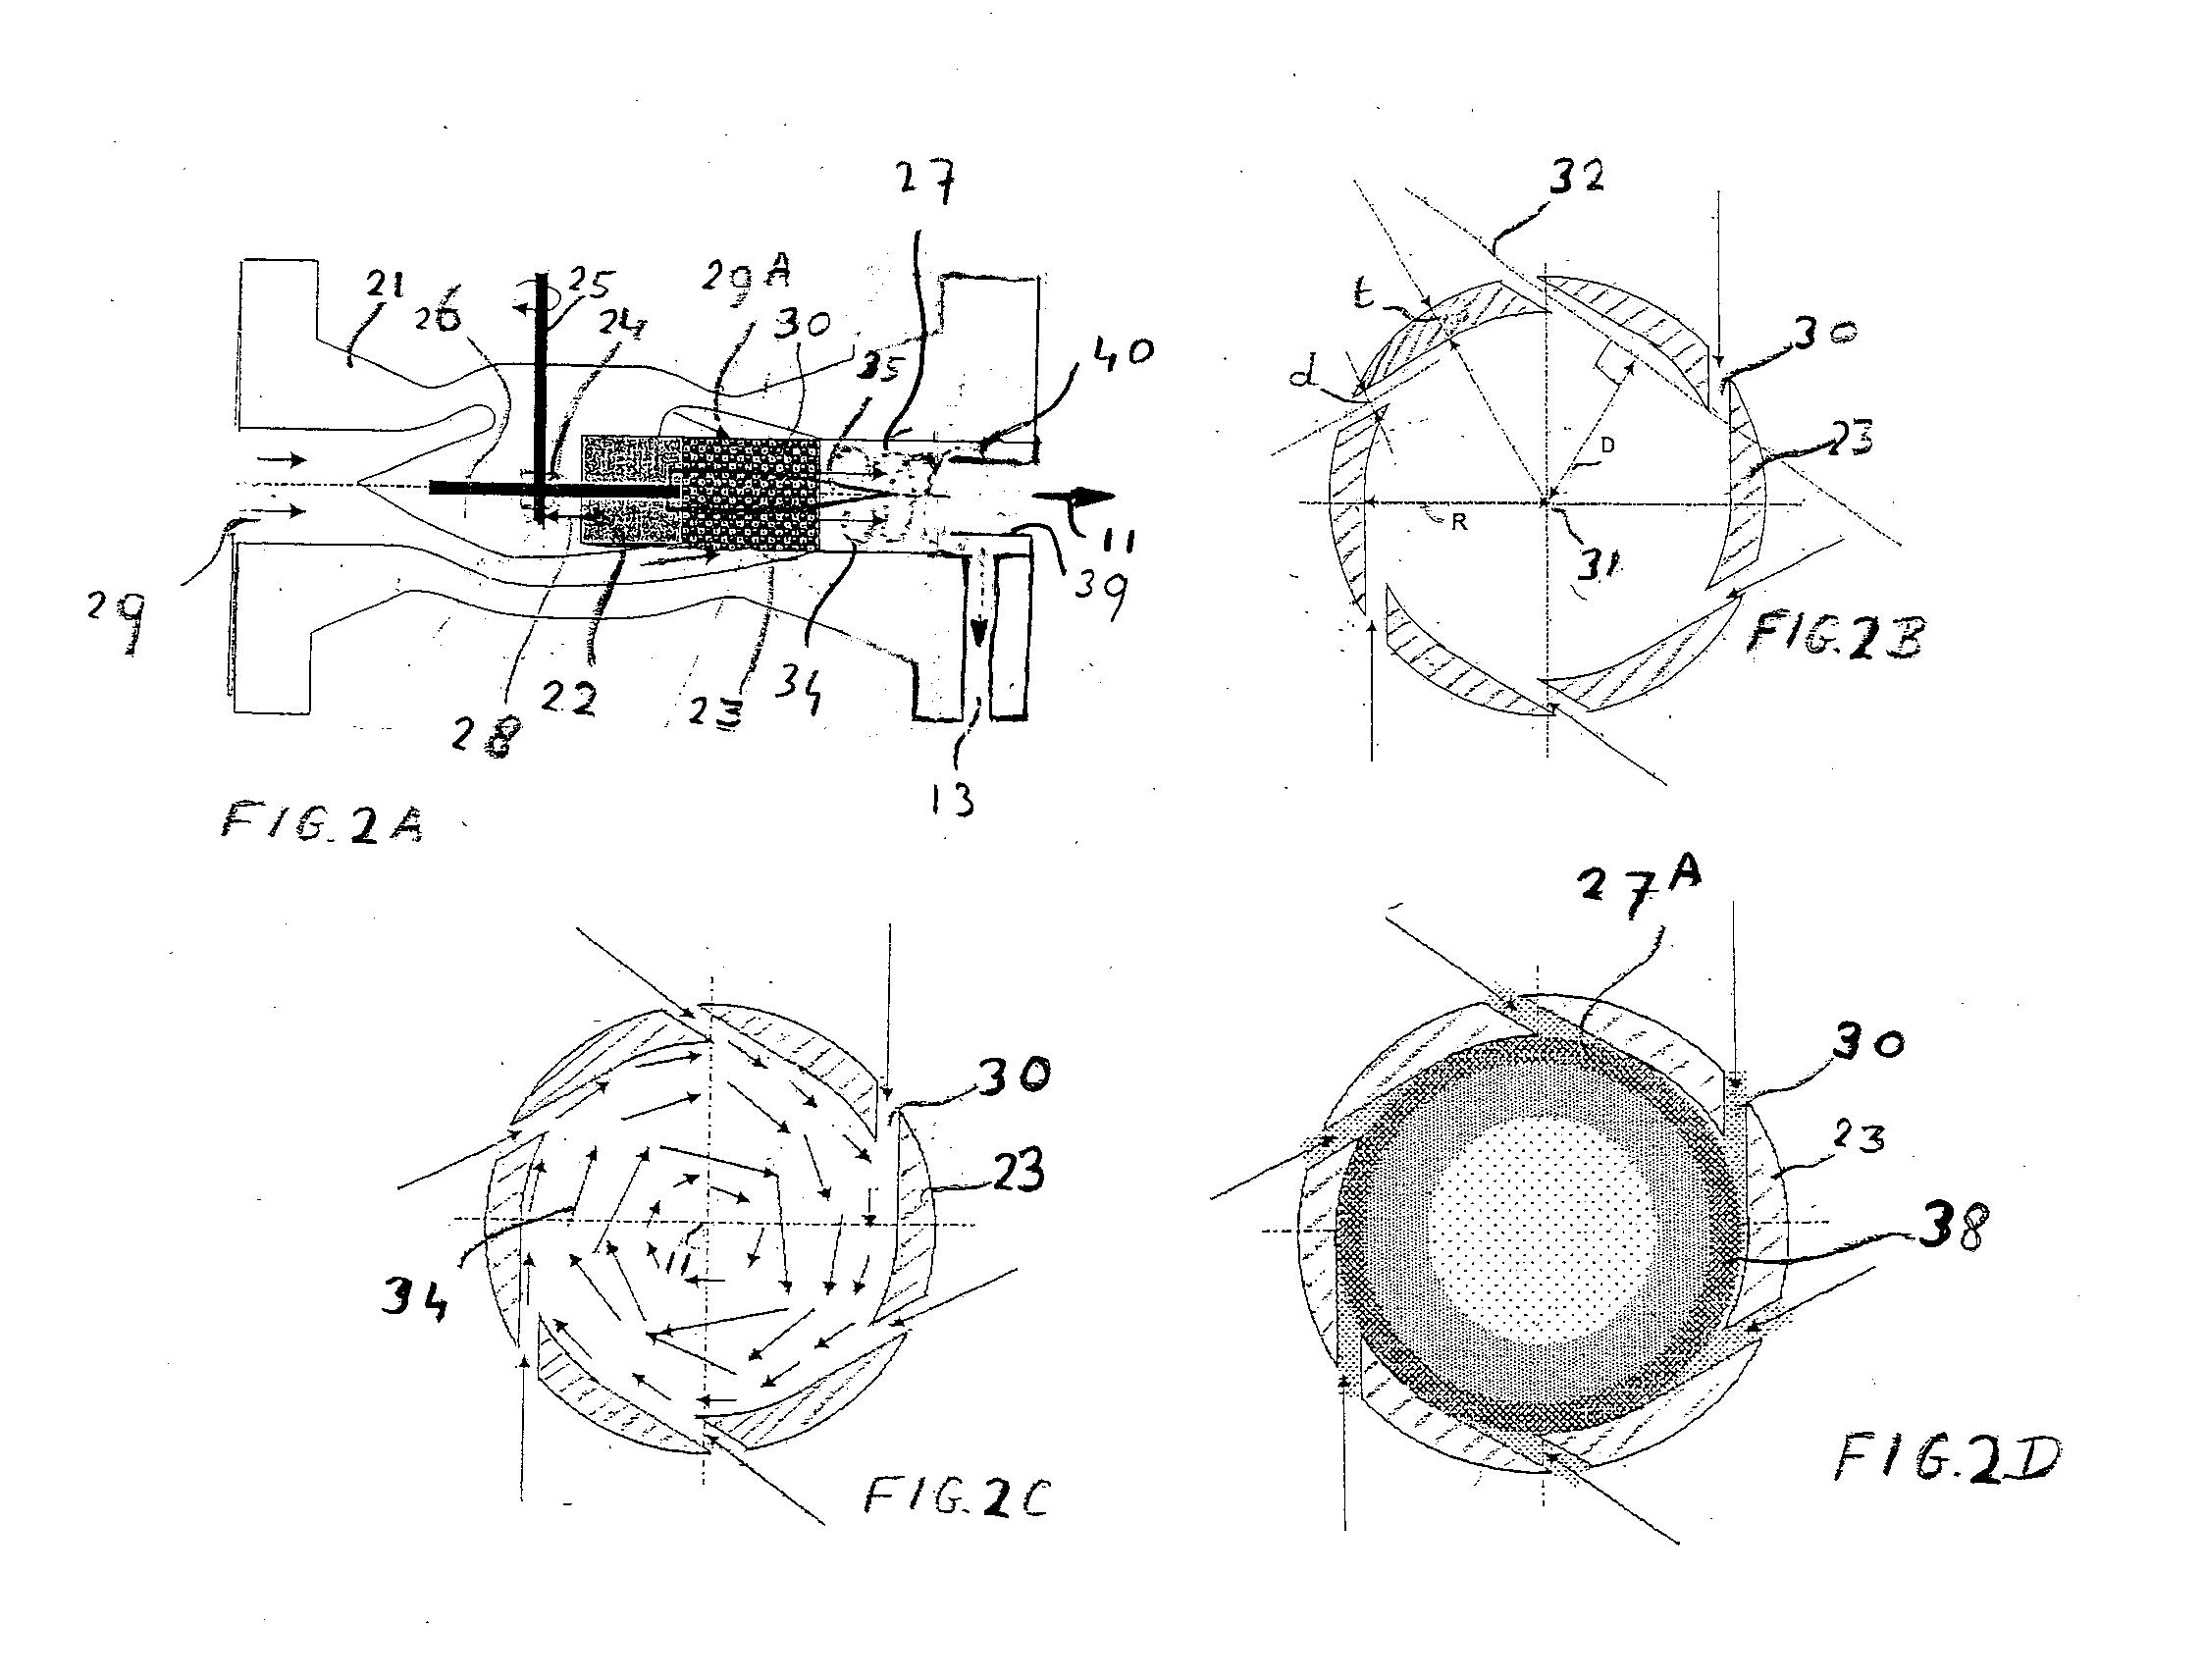 Method and System for Cooling a Natural Gas Stream and Separating the Cooled Stream Into Various Fractions